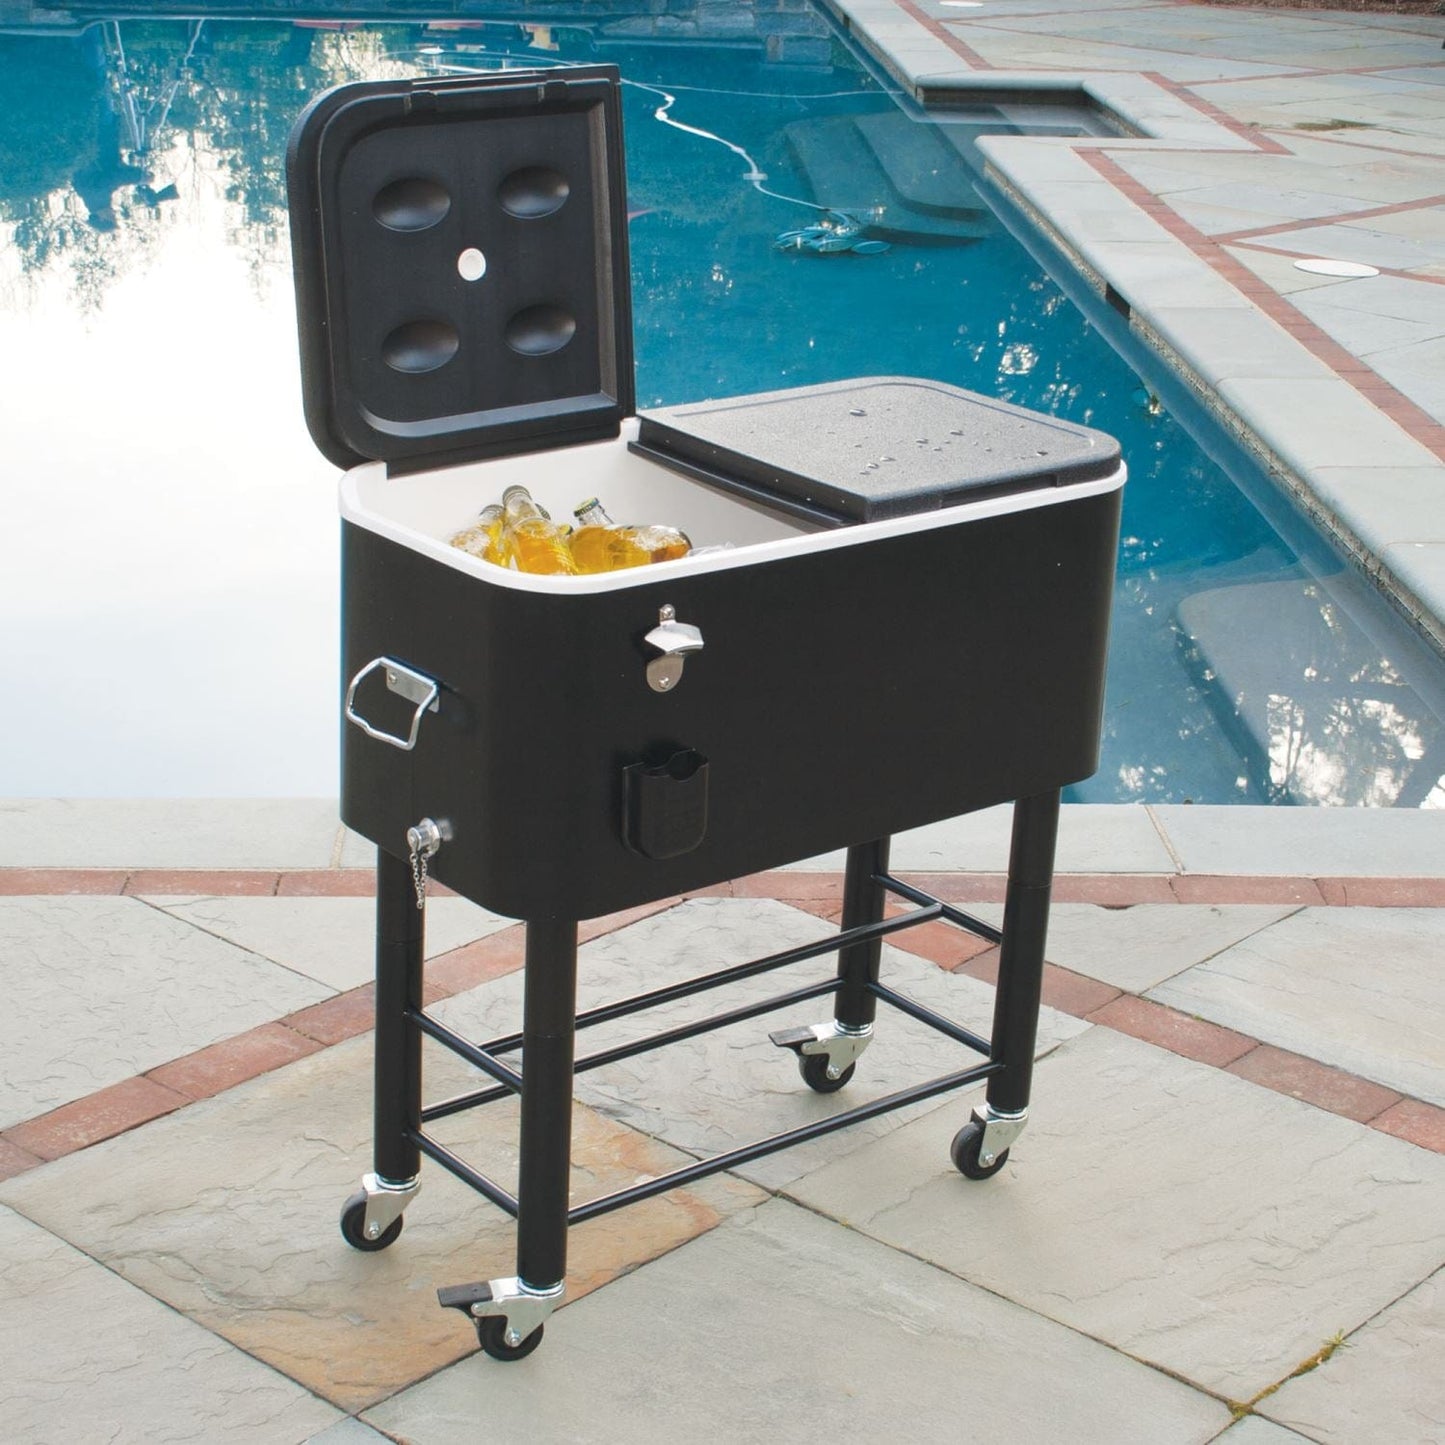 The Fulfiller Cooler RIO Gear | Entertainer Rolling Party Cooler 77 Qt. RC100-55-1